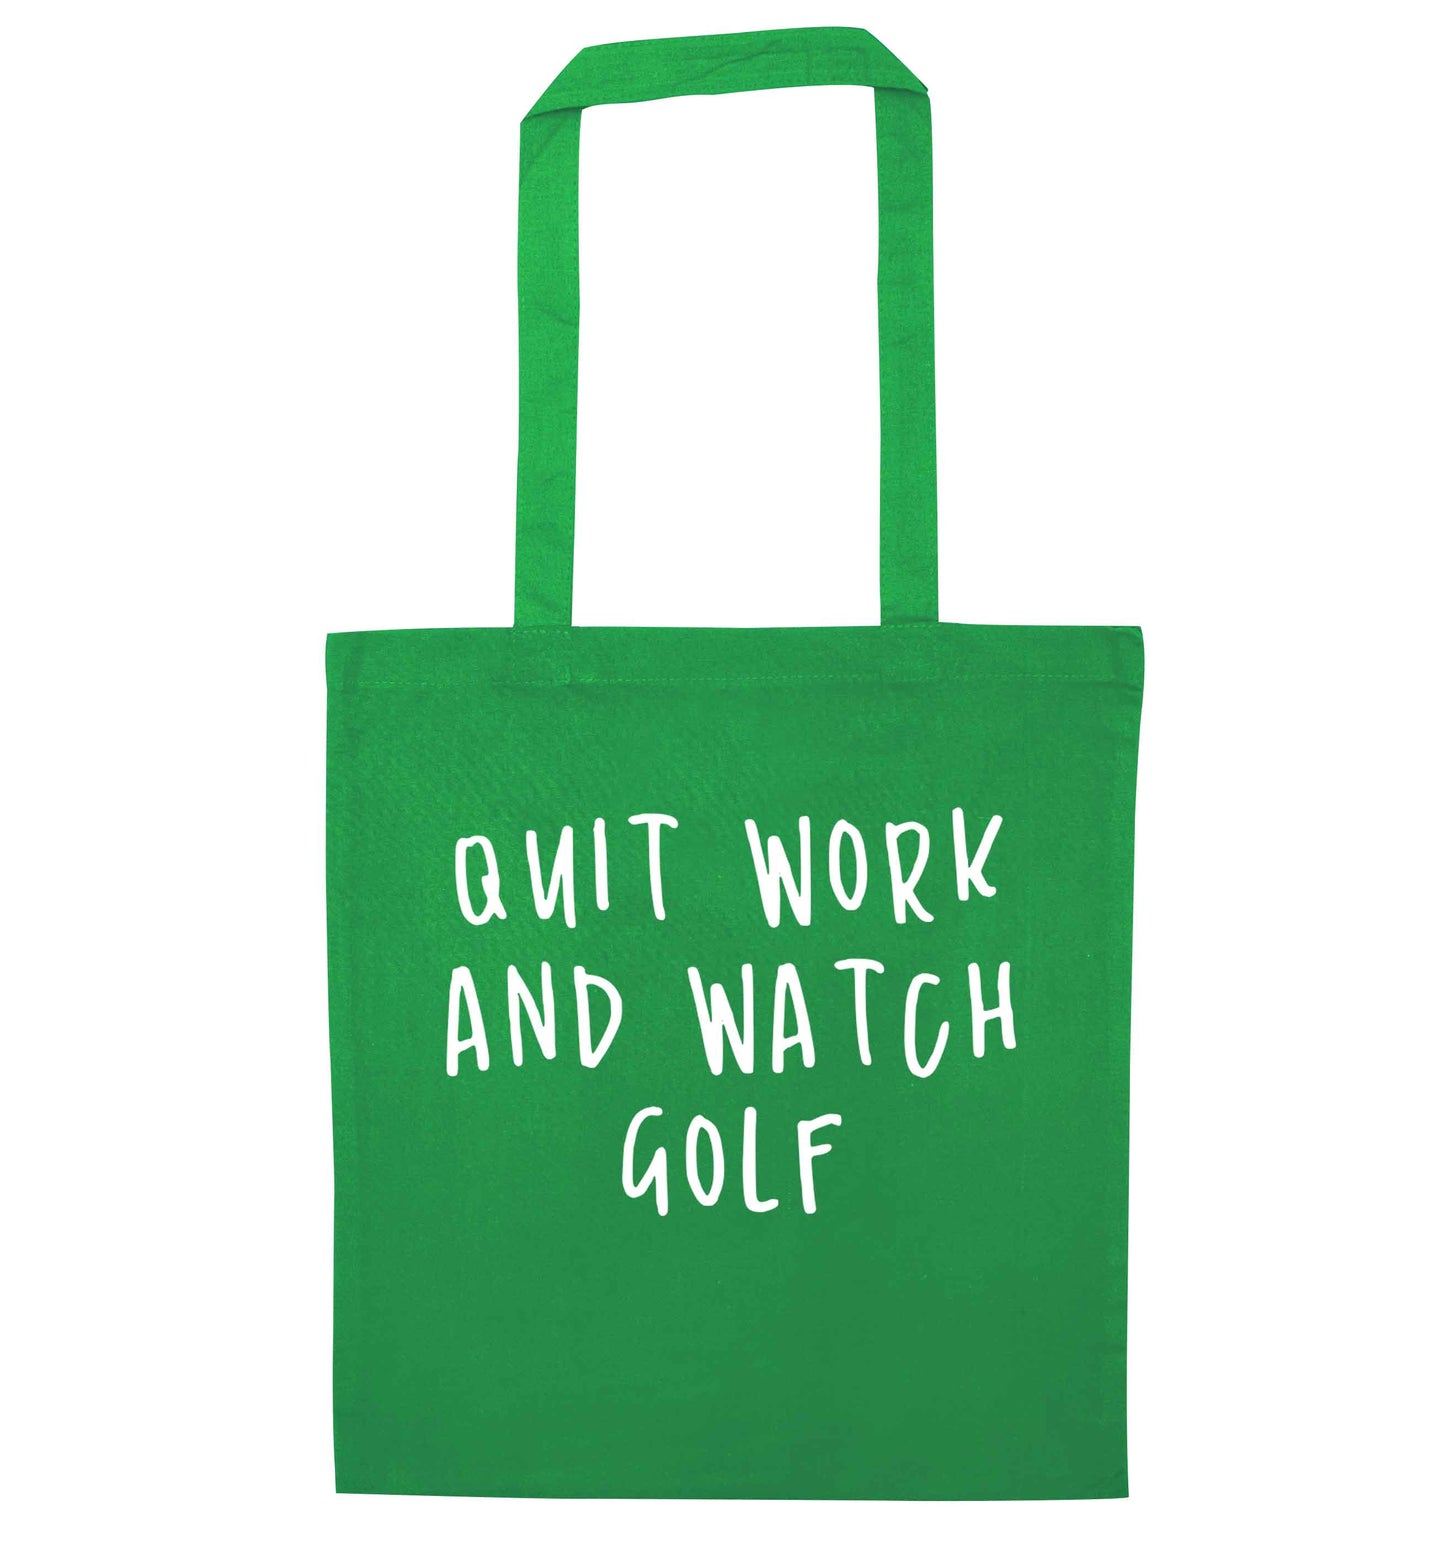 Quit work and watch golf green tote bag